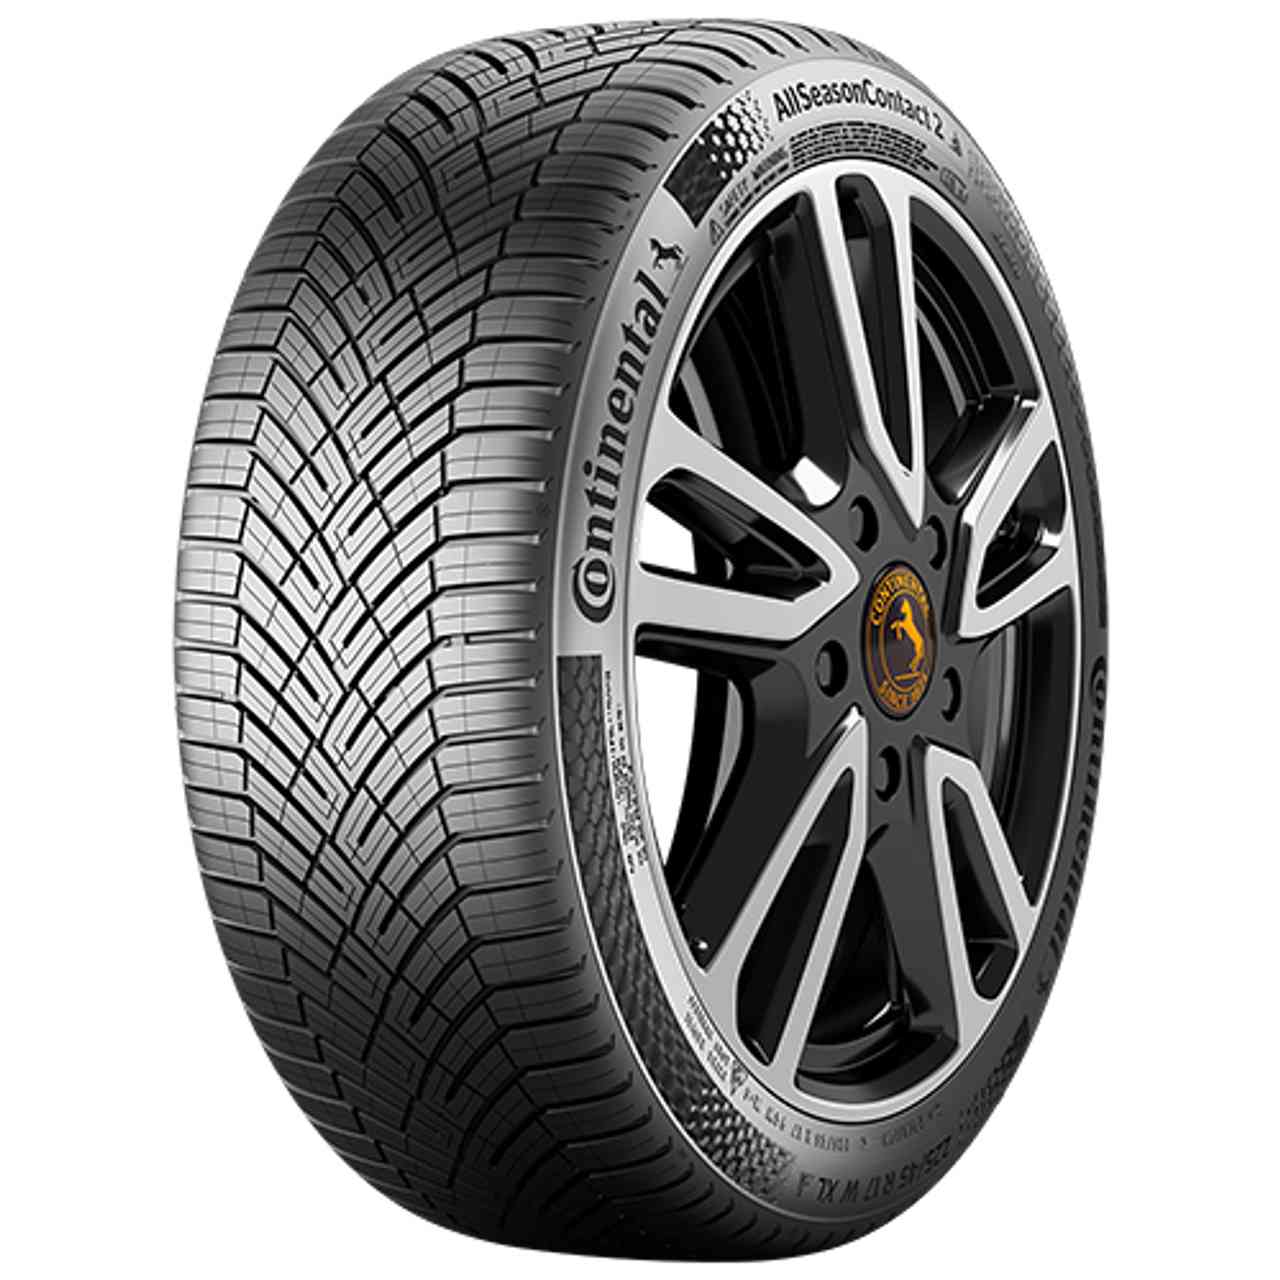 CONTINENTAL ALLSEASONCONTACT 2 (EVc) 205/55R16 94H BSW